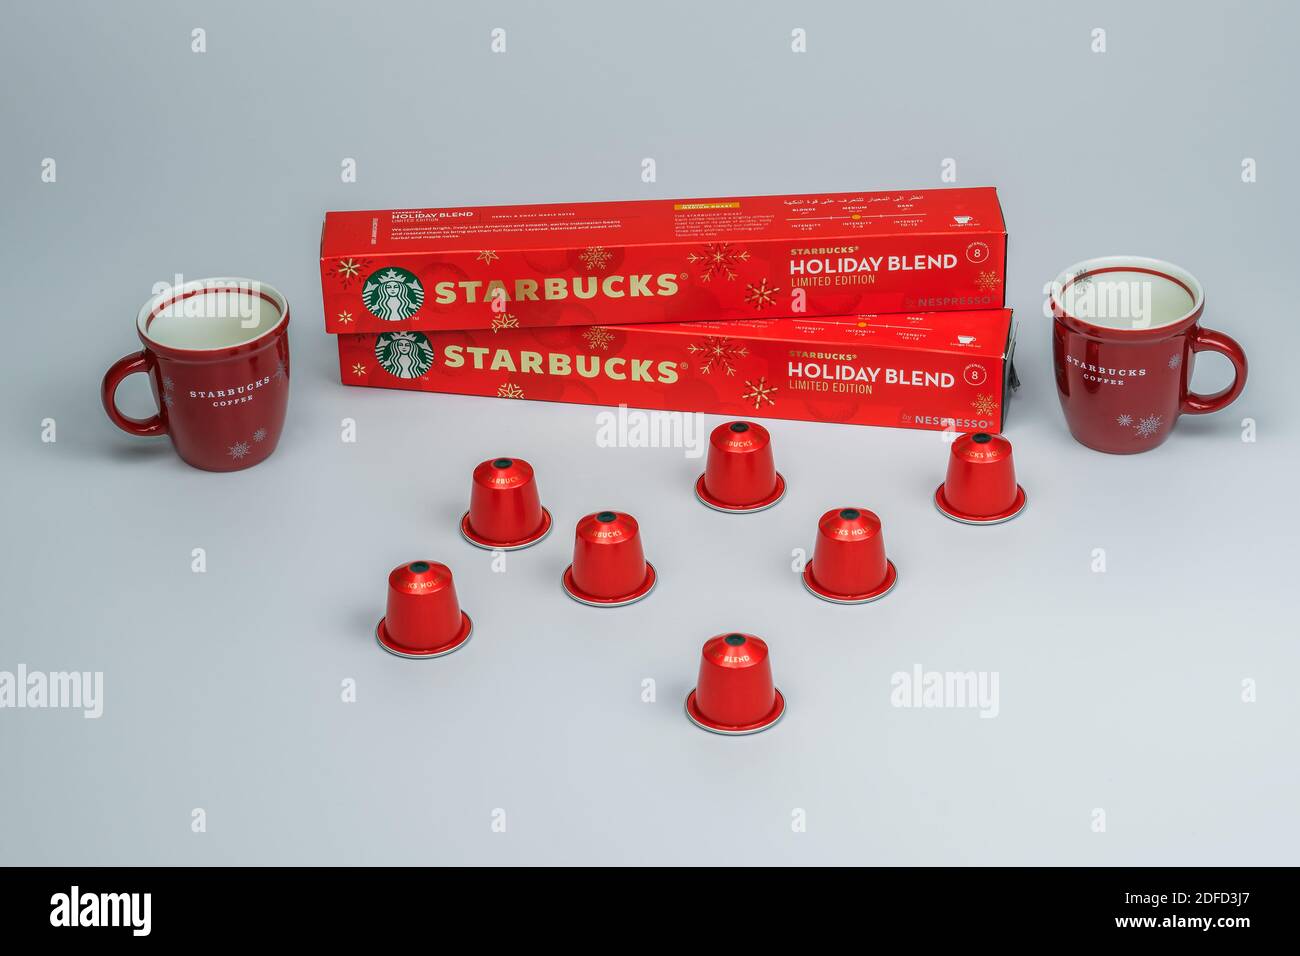 https://c8.alamy.com/comp/2DFD3J7/starbucks-christmas-espresso-cups-next-to-nespresso-machine-variety-of-branded-holiday-mugs-behind-aluminum-capsules-used-to-make-dripping-coffee-2DFD3J7.jpg